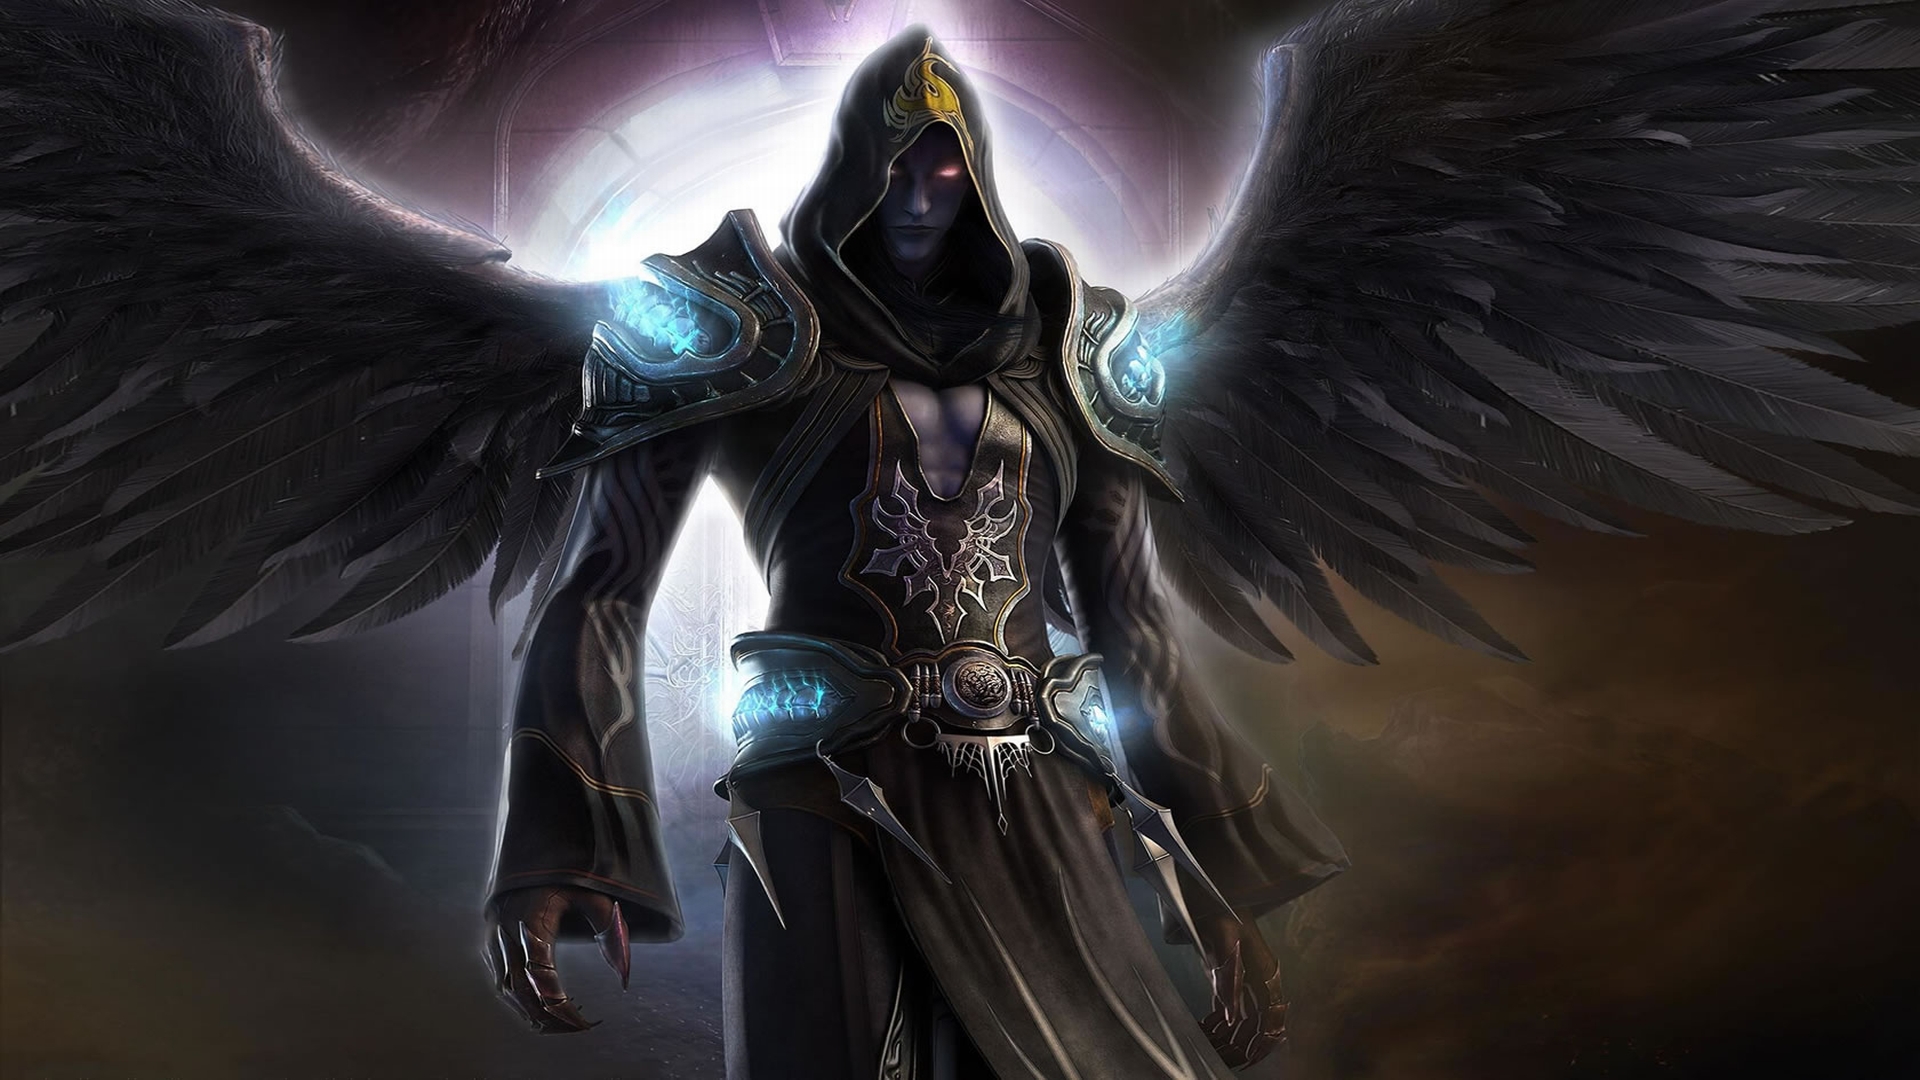 Dark Angel with majestic wings, representing the fantasy concept of a fallen angel named Sepheroth.